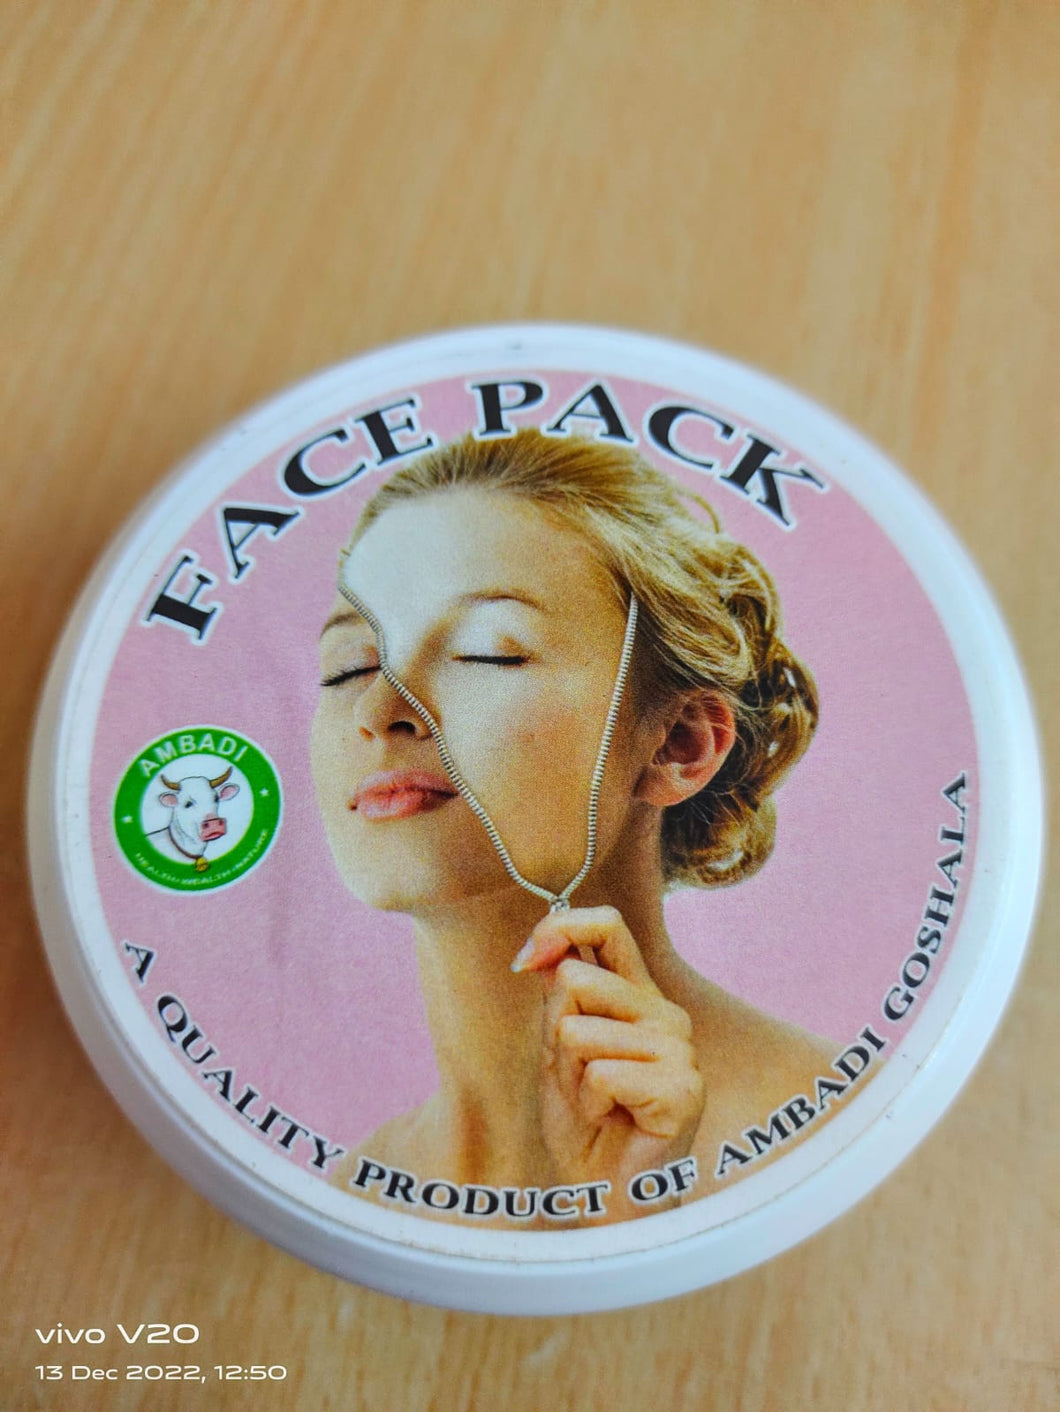 Face Pack